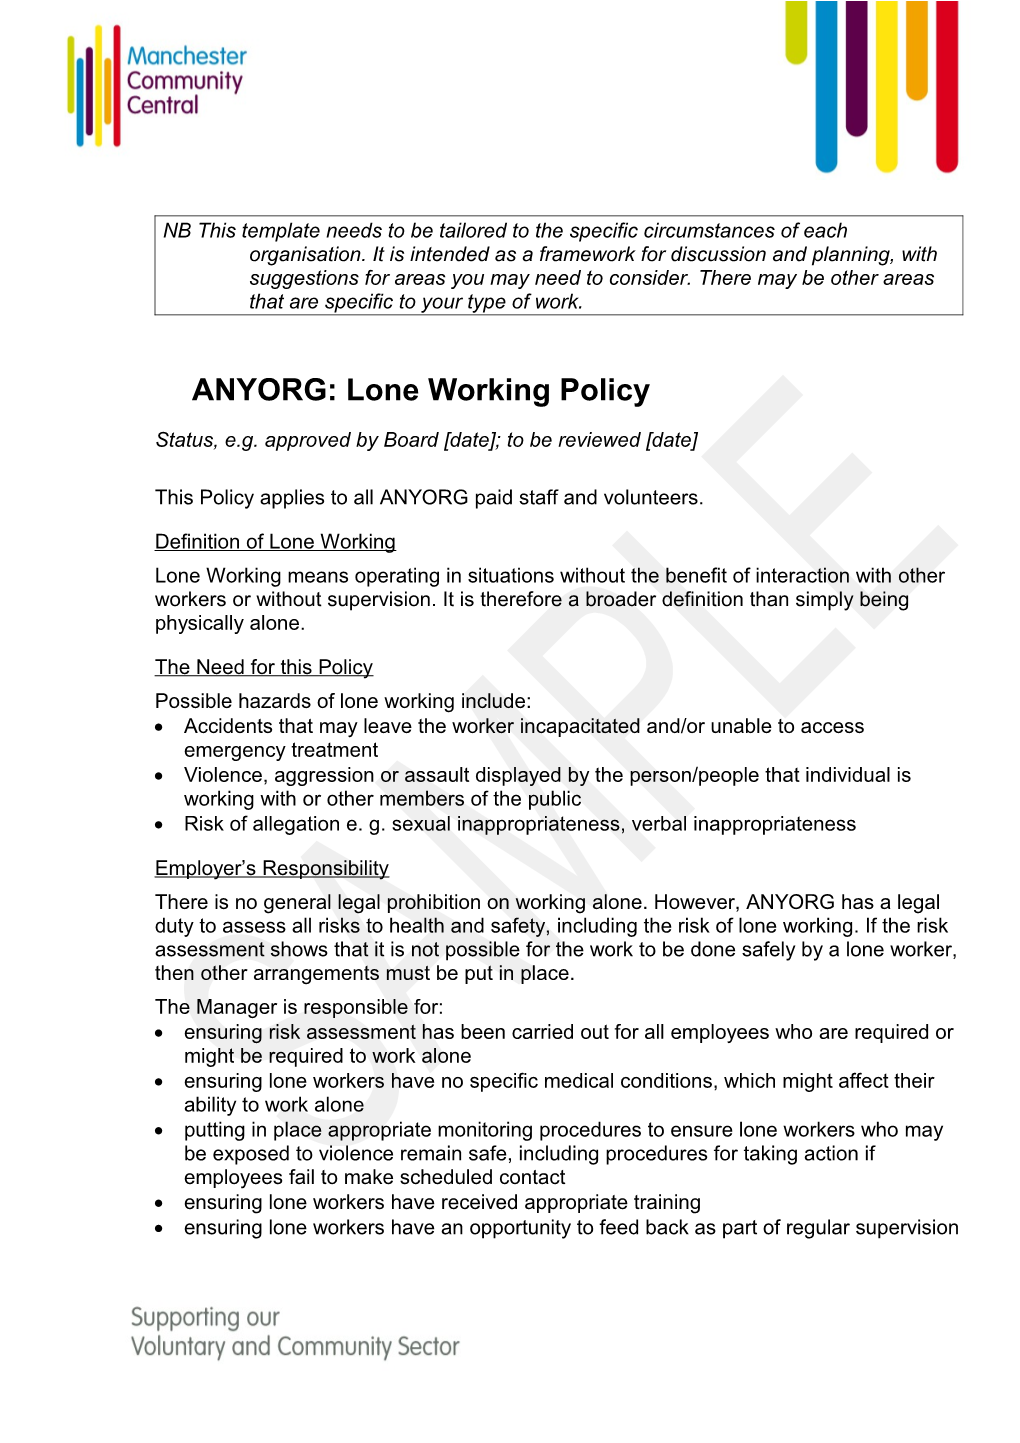 ANYORG: Lone Working Policy